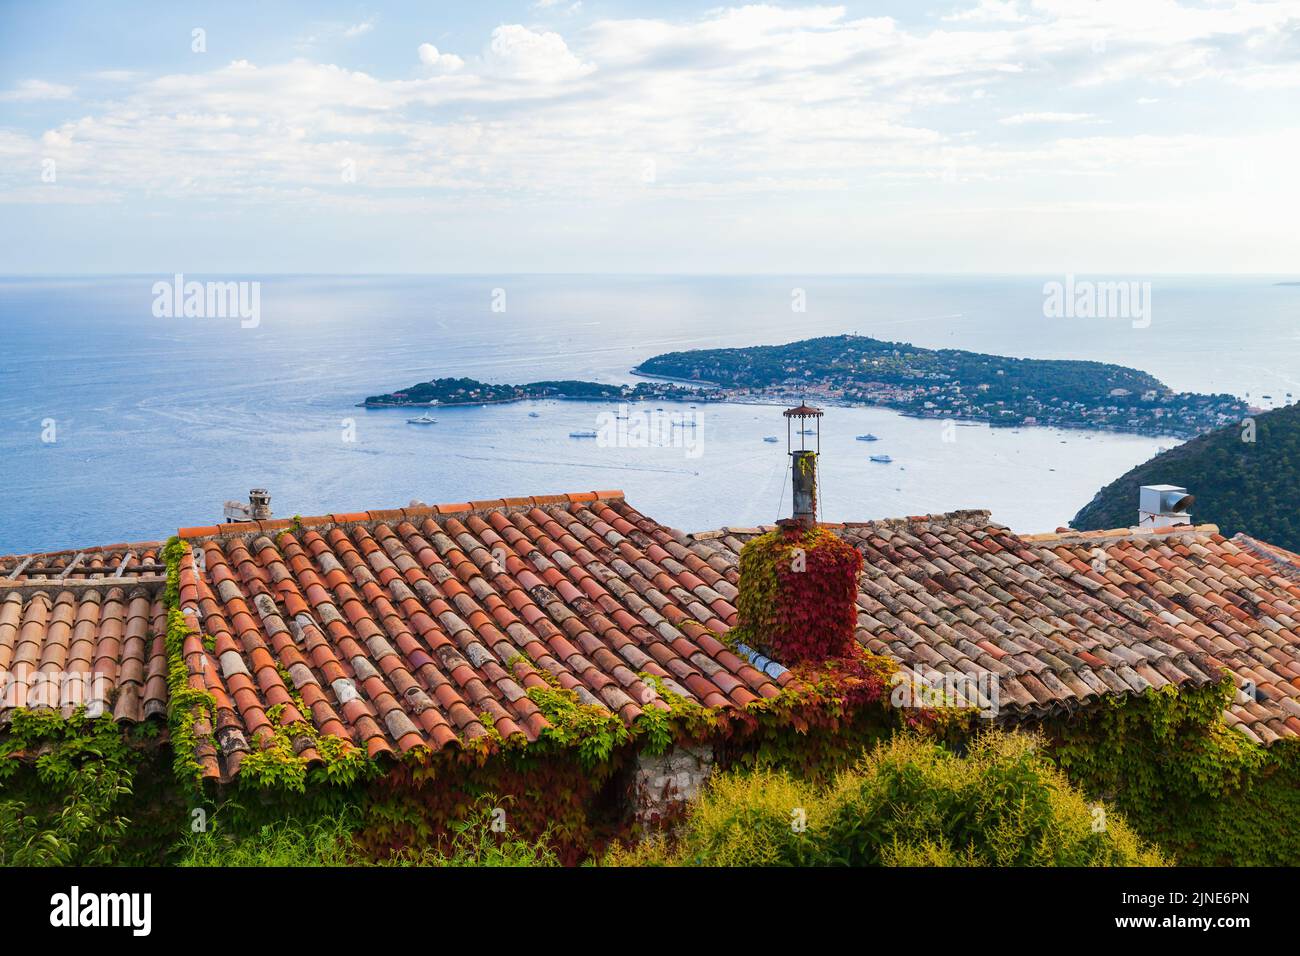 Eze, Alpes-Maritimes, France. Coastal landscape with old red tile roofs Stock Photo